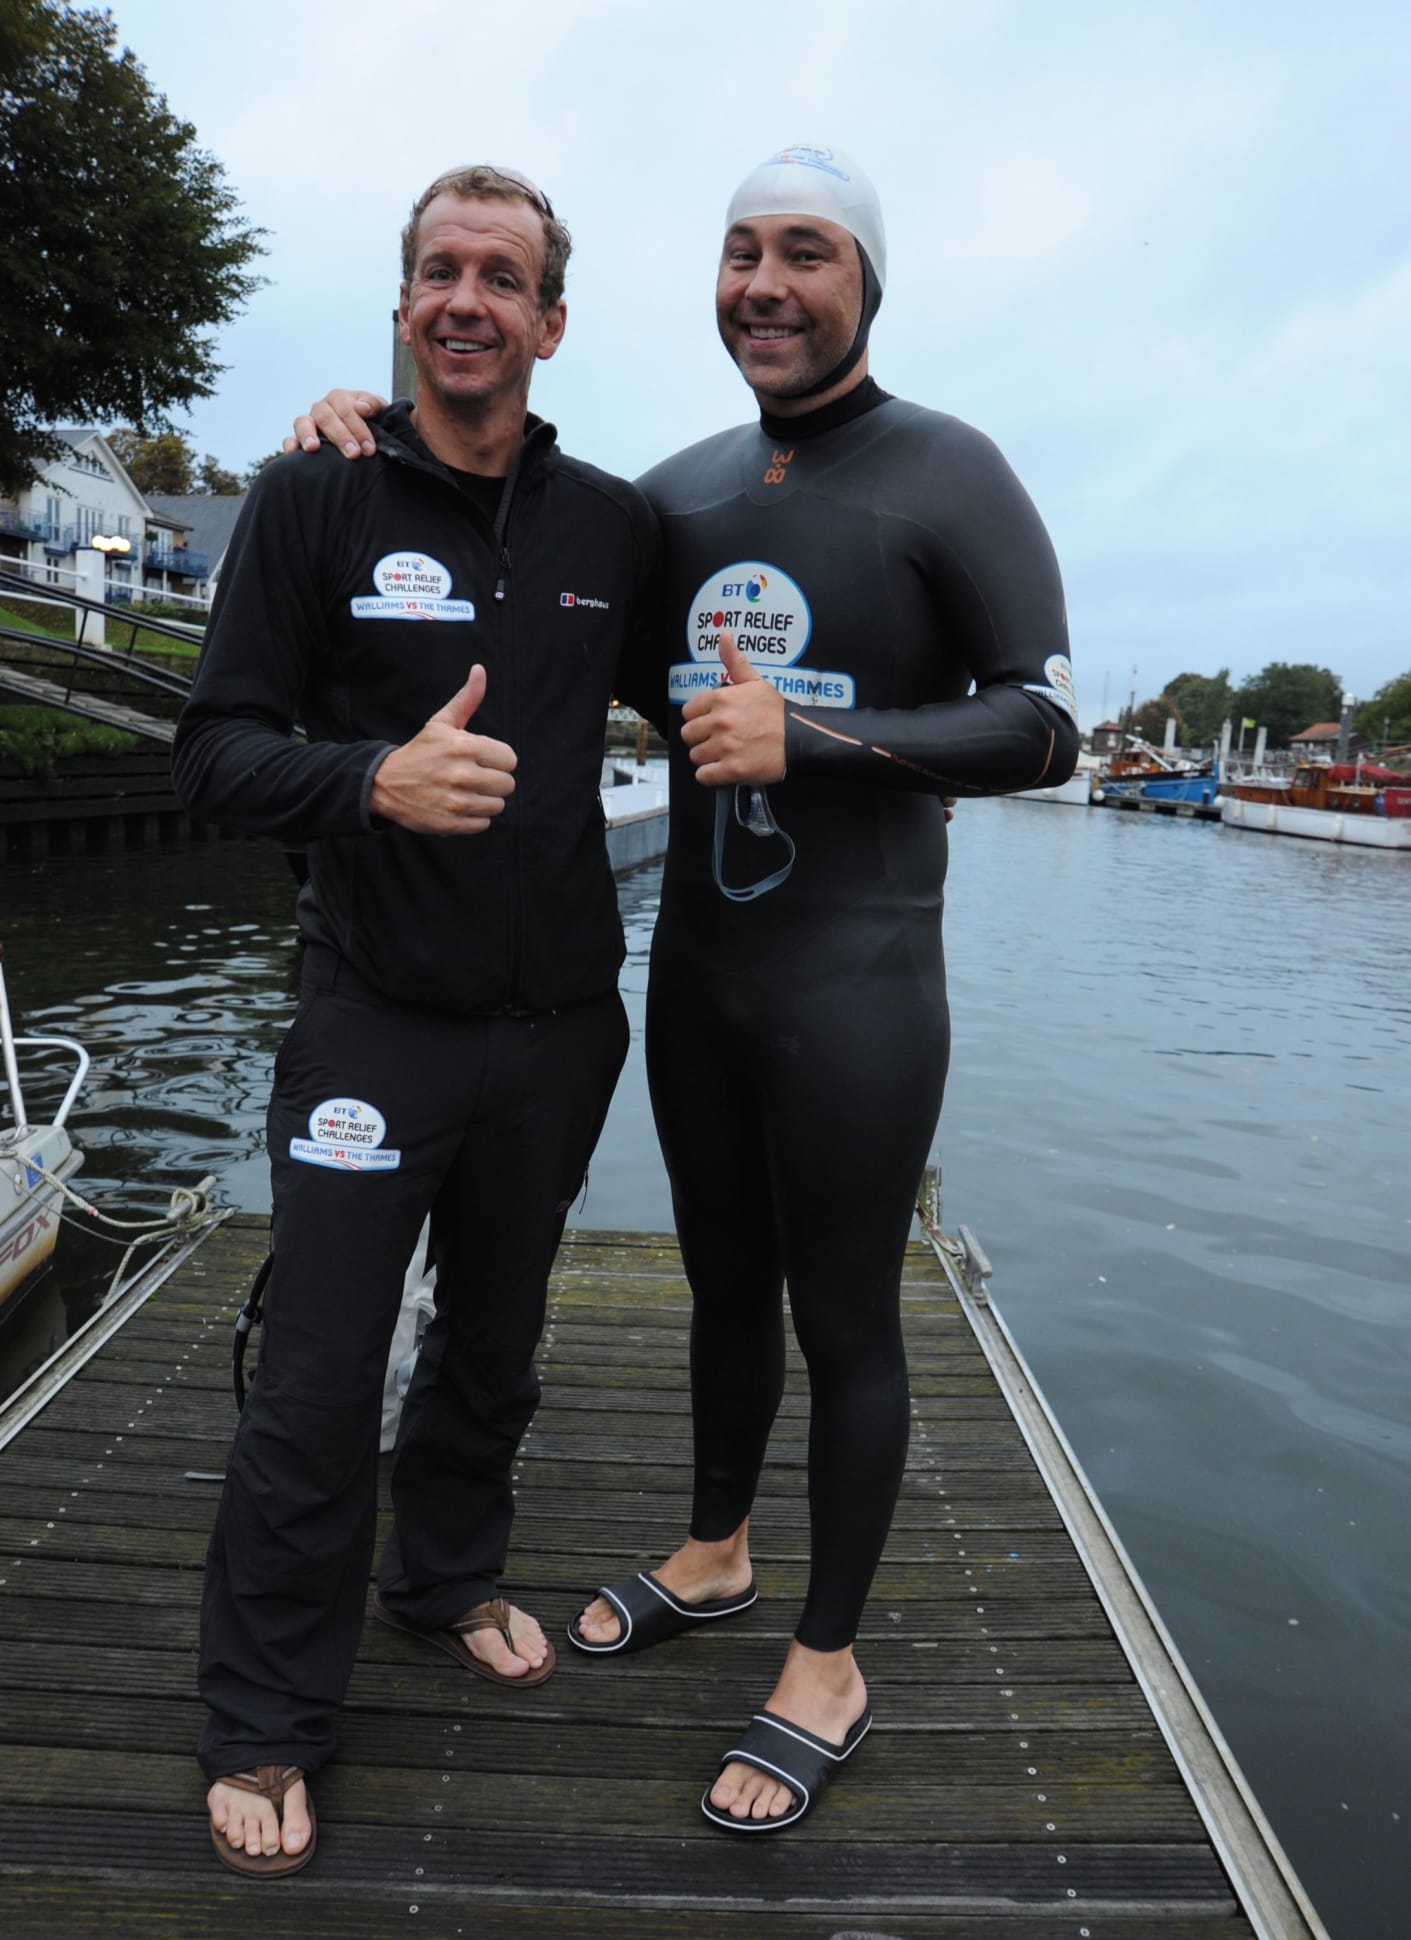 Greg Whyte and David Walliams standing on a jetty